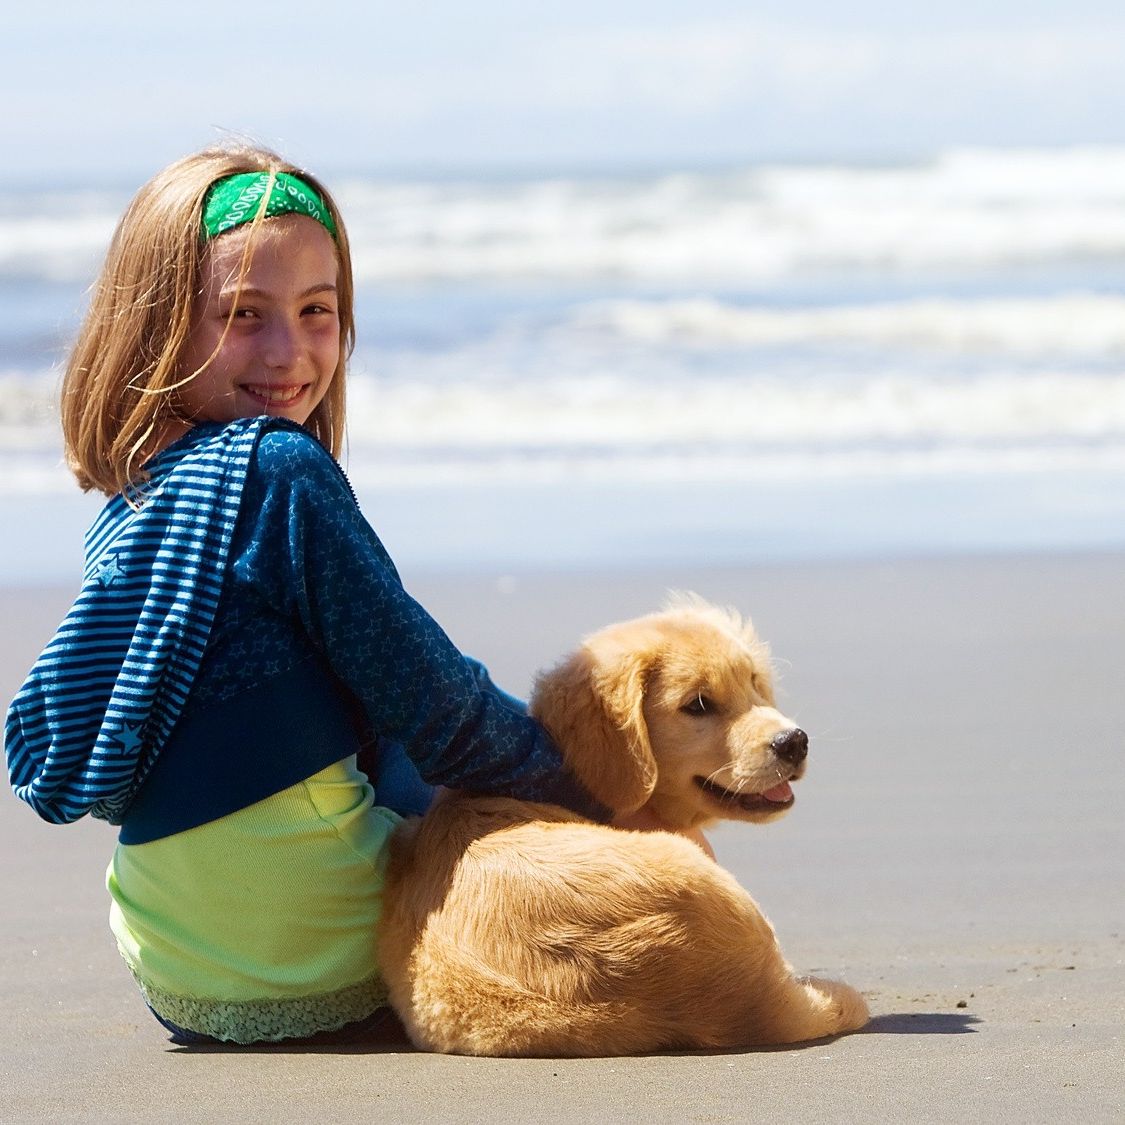 Little girl with her dog on the beach